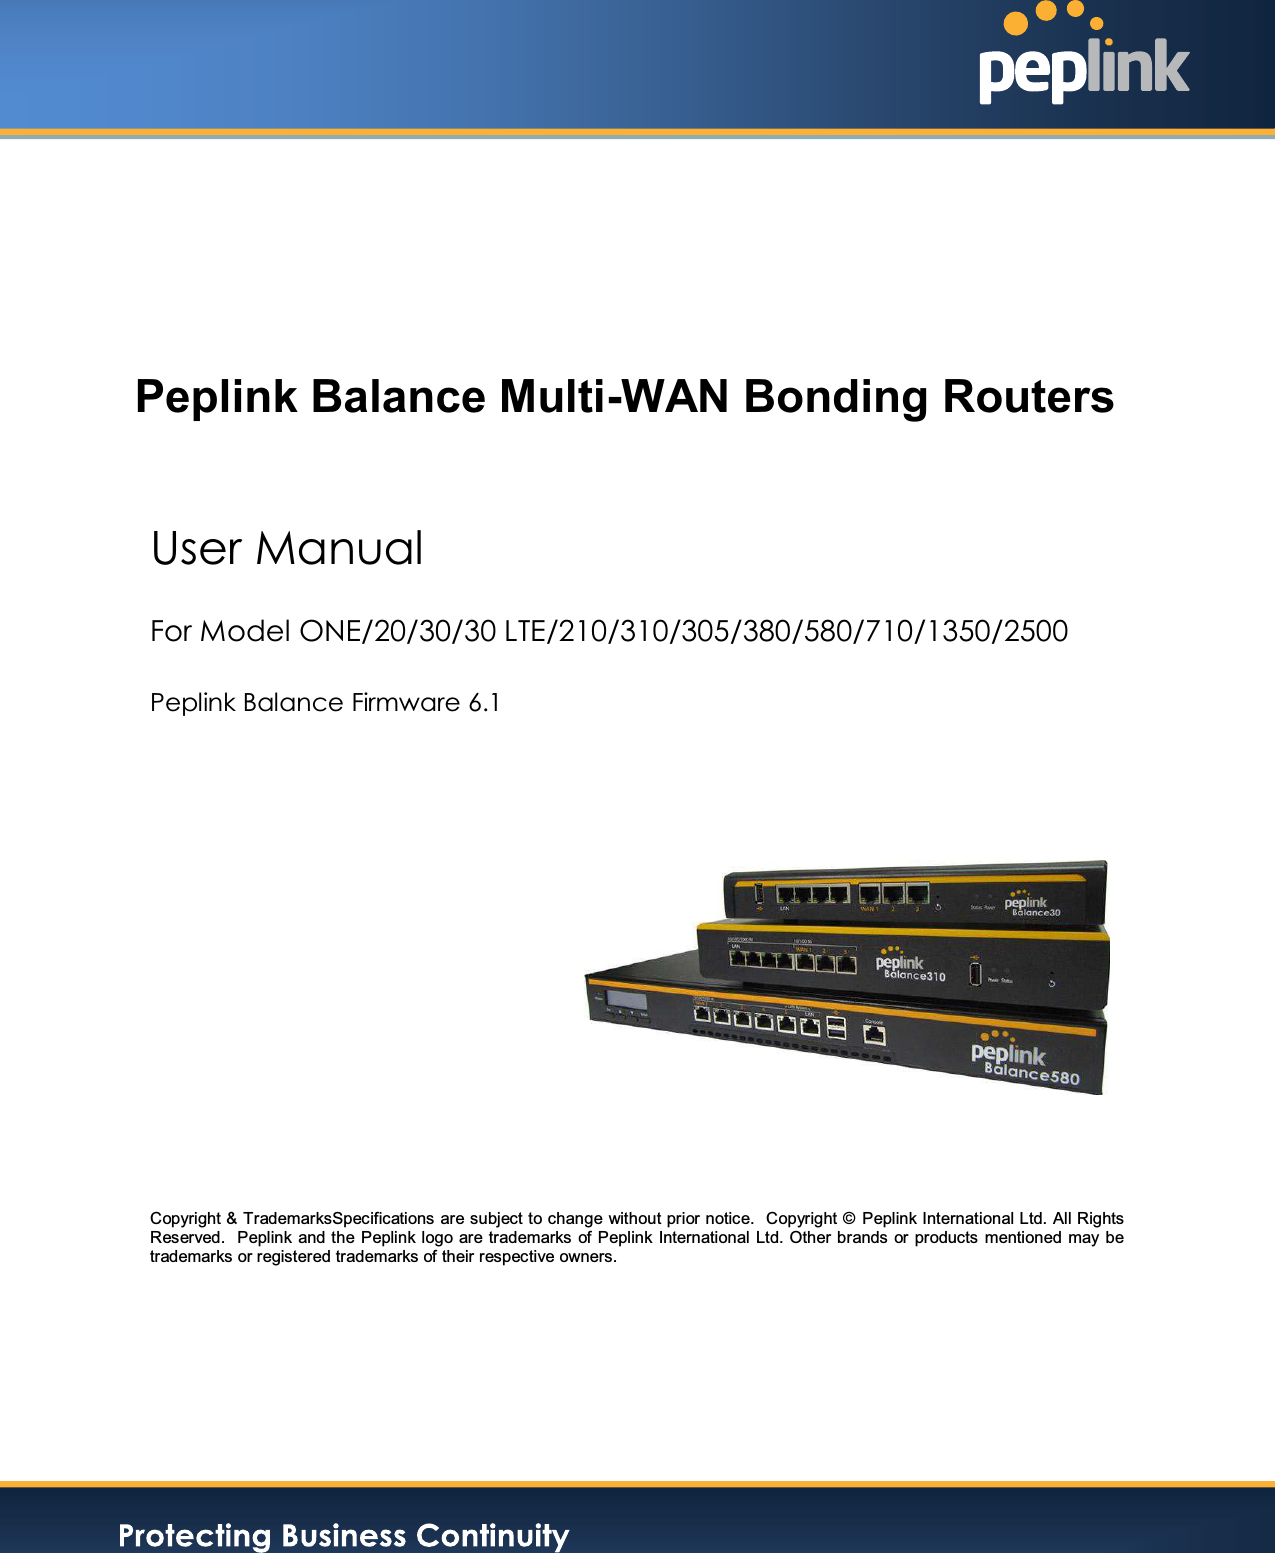       User Manual For Model ONE/20/30/30 LTE/210/310/305/380/580/710/1350/2500  Peplink Balance Firmware 6.1               Copyright &amp; TrademarksSpecifications are subject to change without prior notice.  Copyright ©  Peplink International Ltd. All Rights Reserved.  Peplink and the  Peplink logo are trademarks of Peplink  International Ltd. Other brands  or products  mentioned may be trademarks or registered trademarks of their respective owners.Peplink Balance Multi-WAN Bonding Routers 